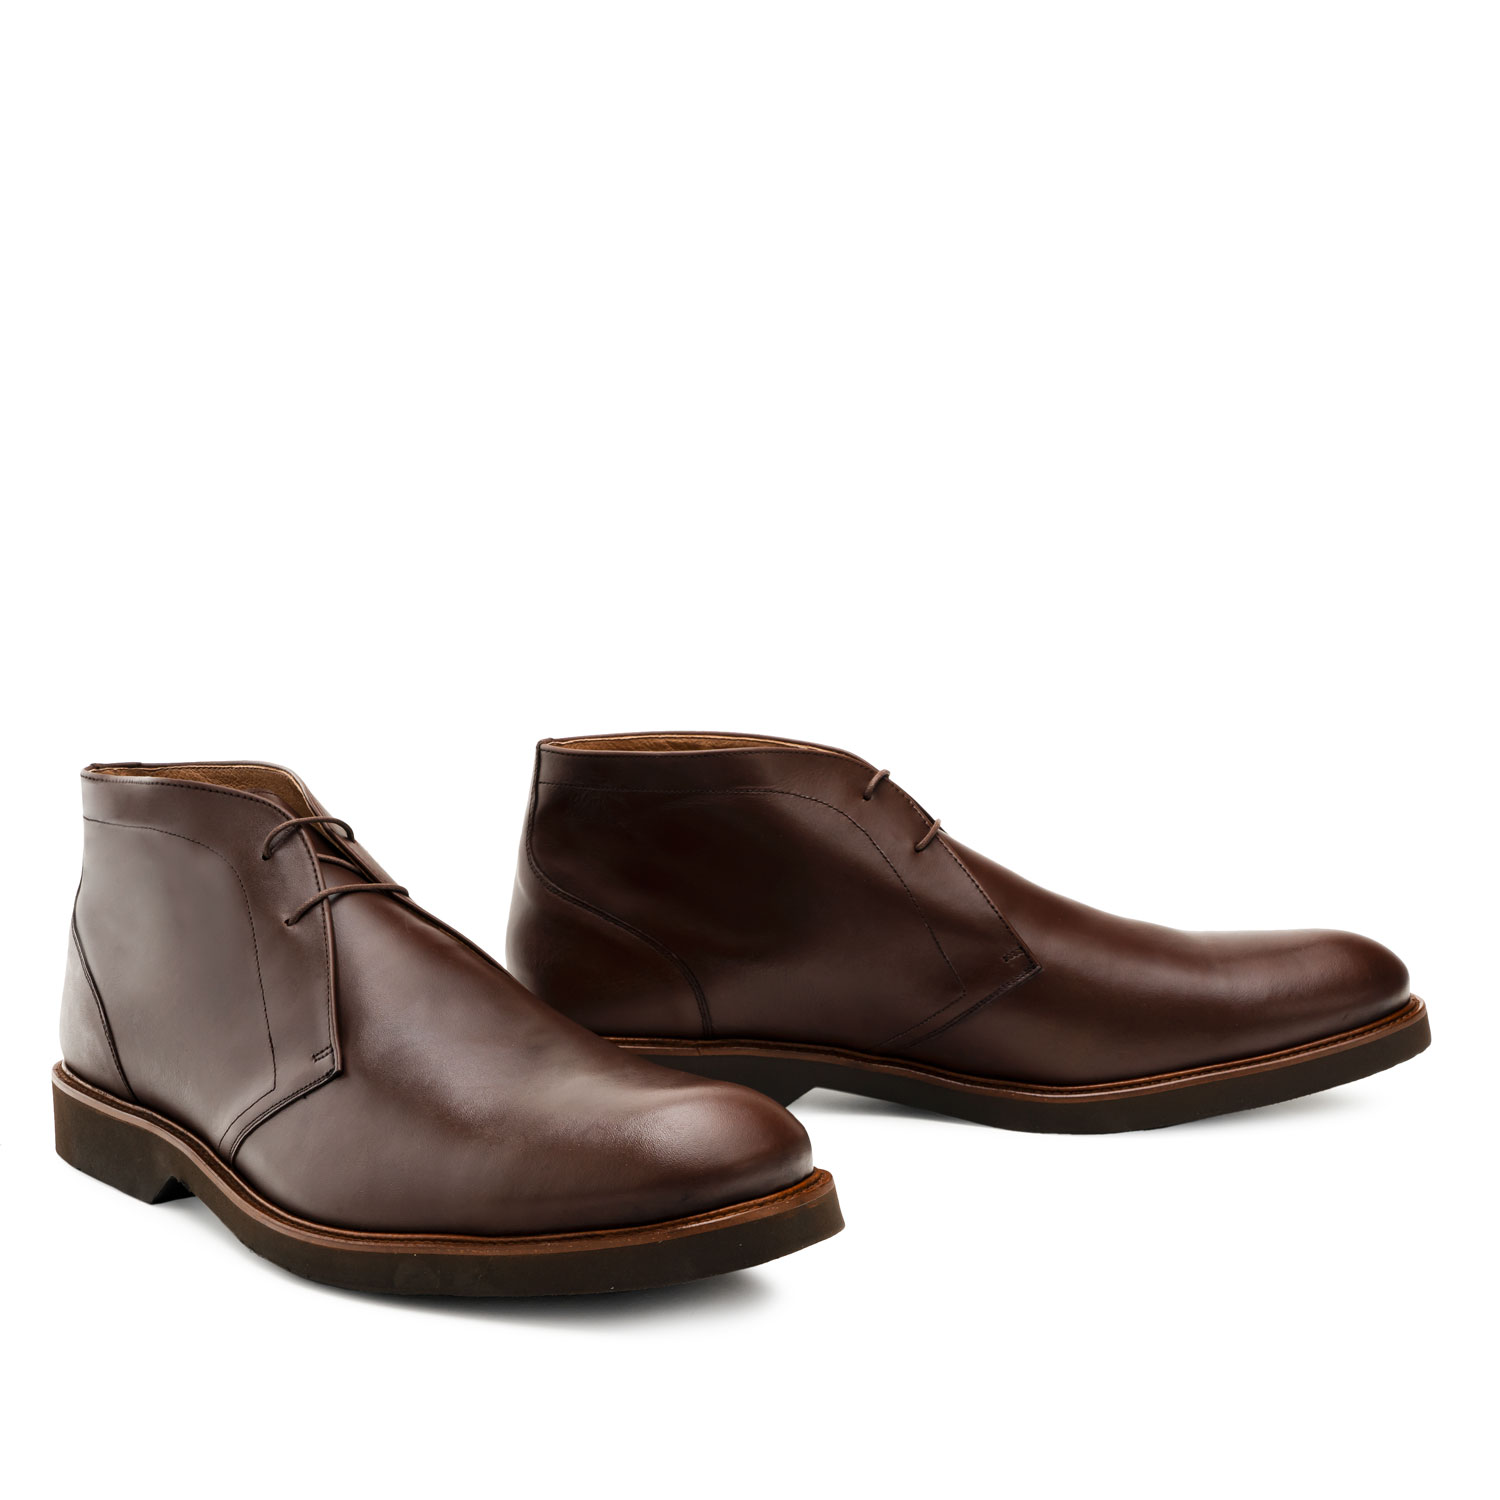 Men's Ankle Boots in Brown Leather 